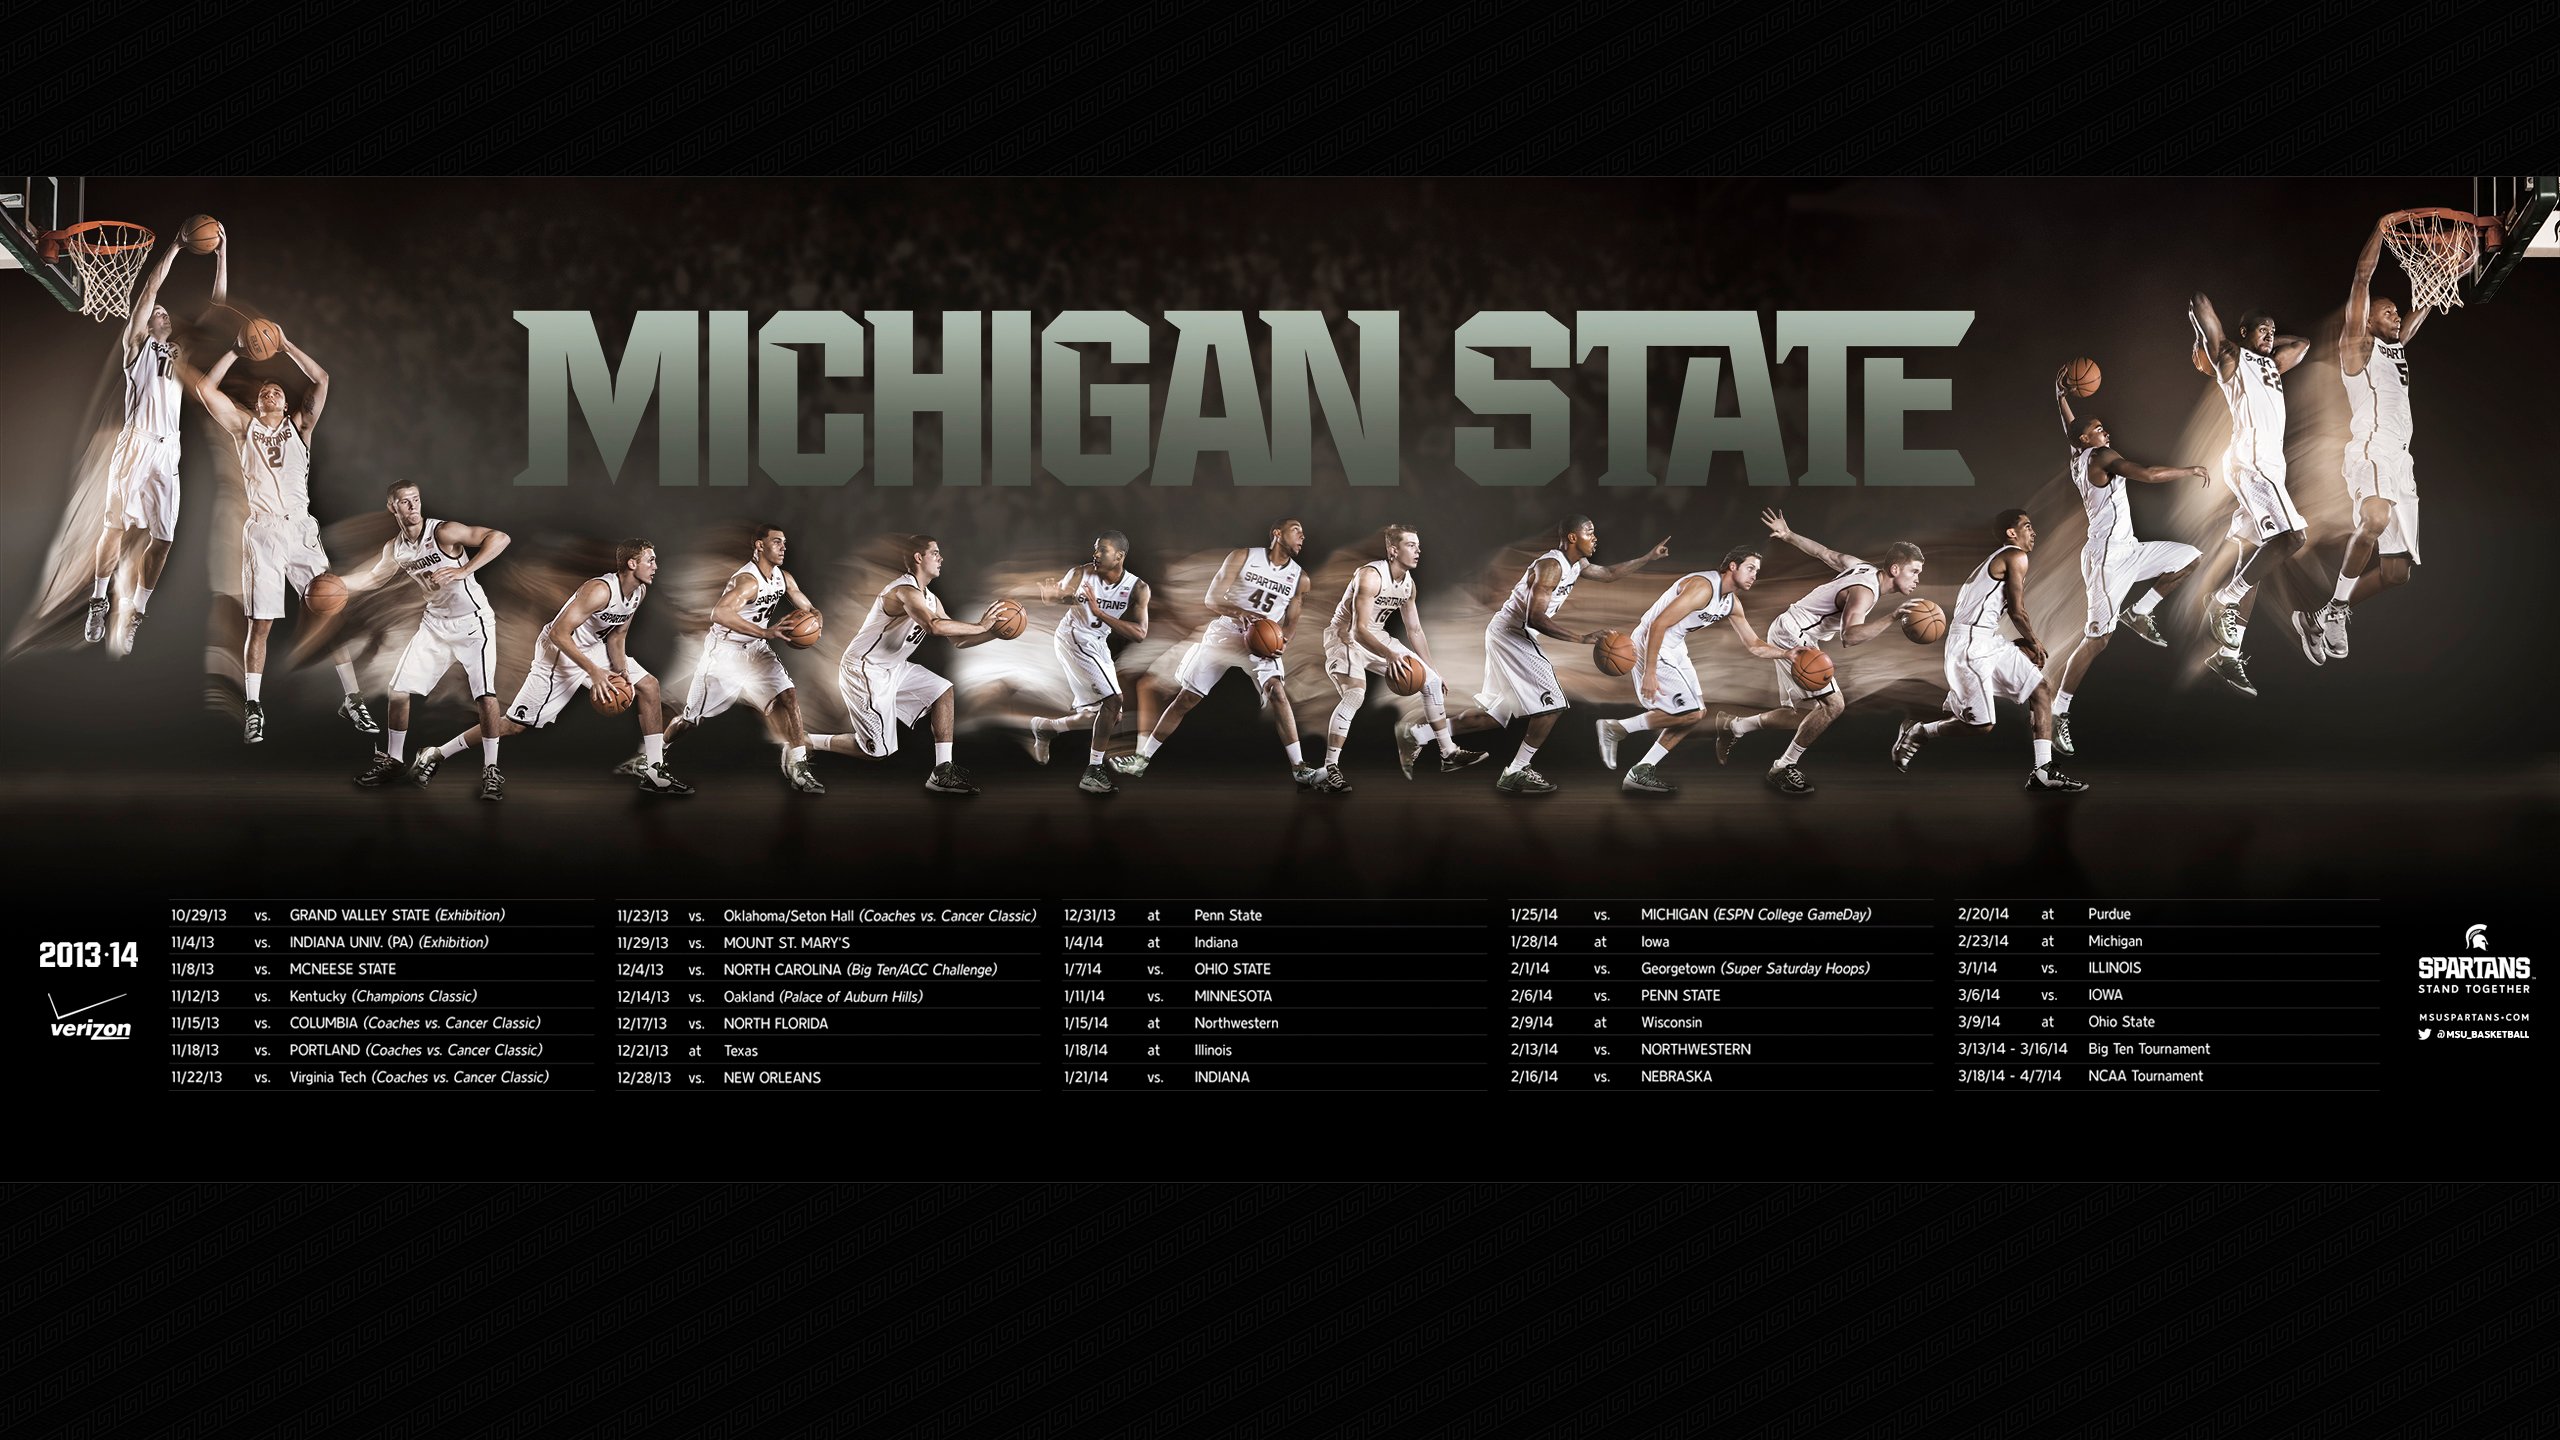 Michigan State Basketball Wallpaper Images Pictures   Becuo